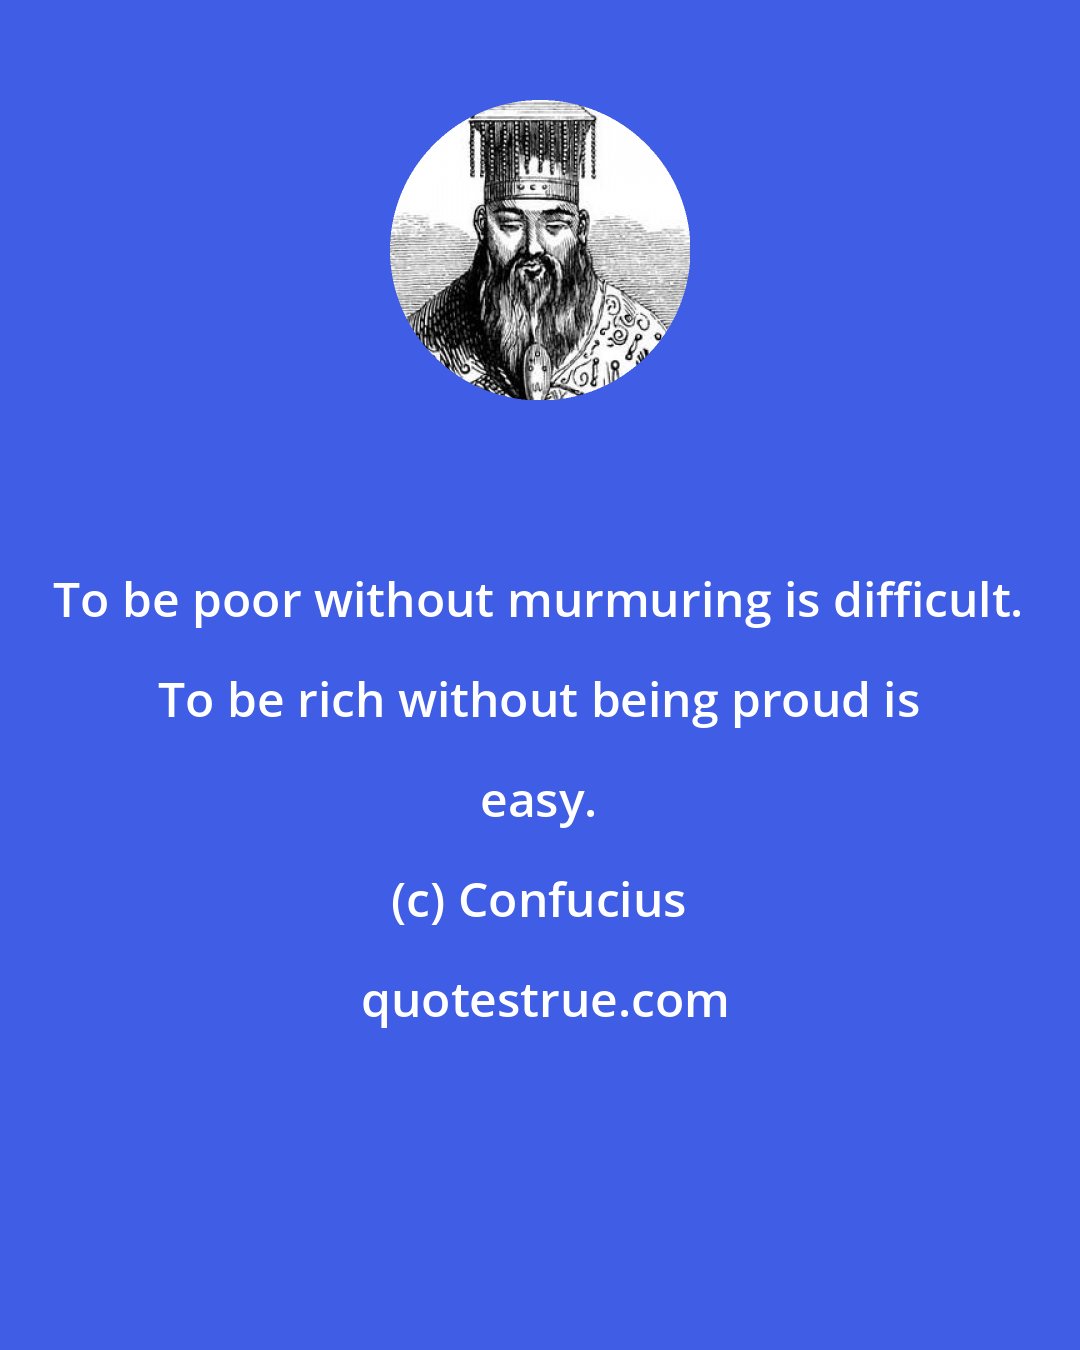 Confucius: To be poor without murmuring is difficult. To be rich without being proud is easy.